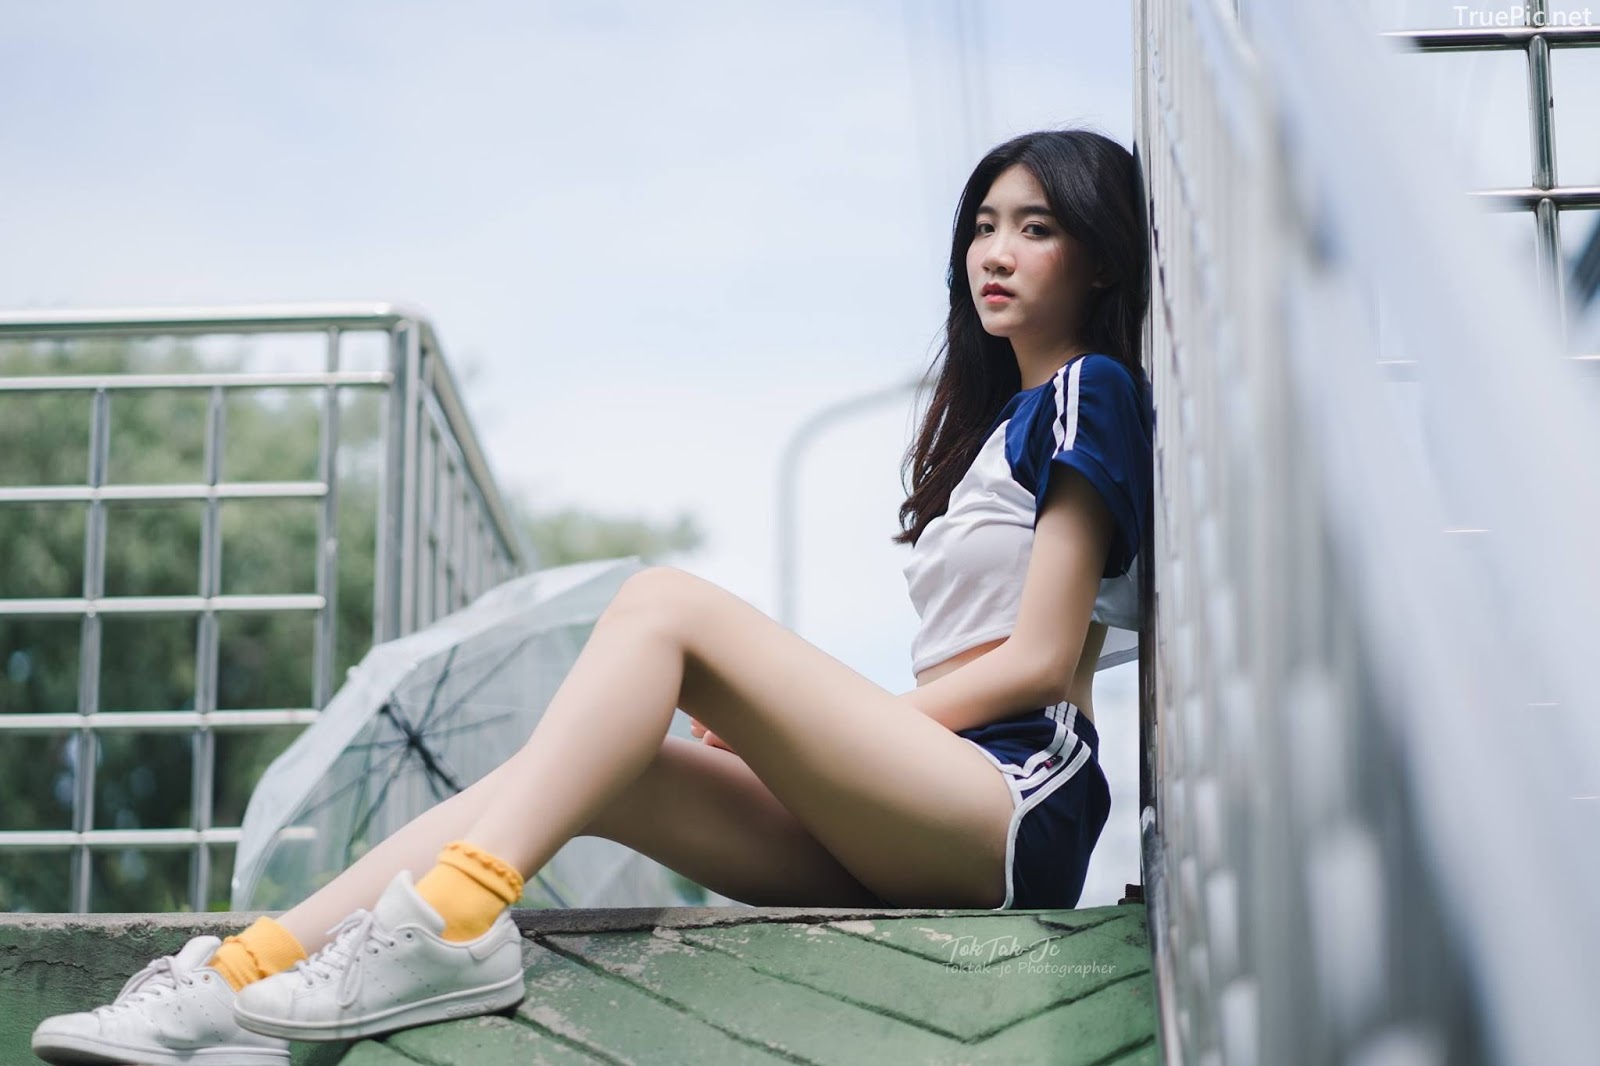 Hot Girl Thailand - Sasi Ngiunwan - Scenes From an Empty City - TruePic.net - Picture 34